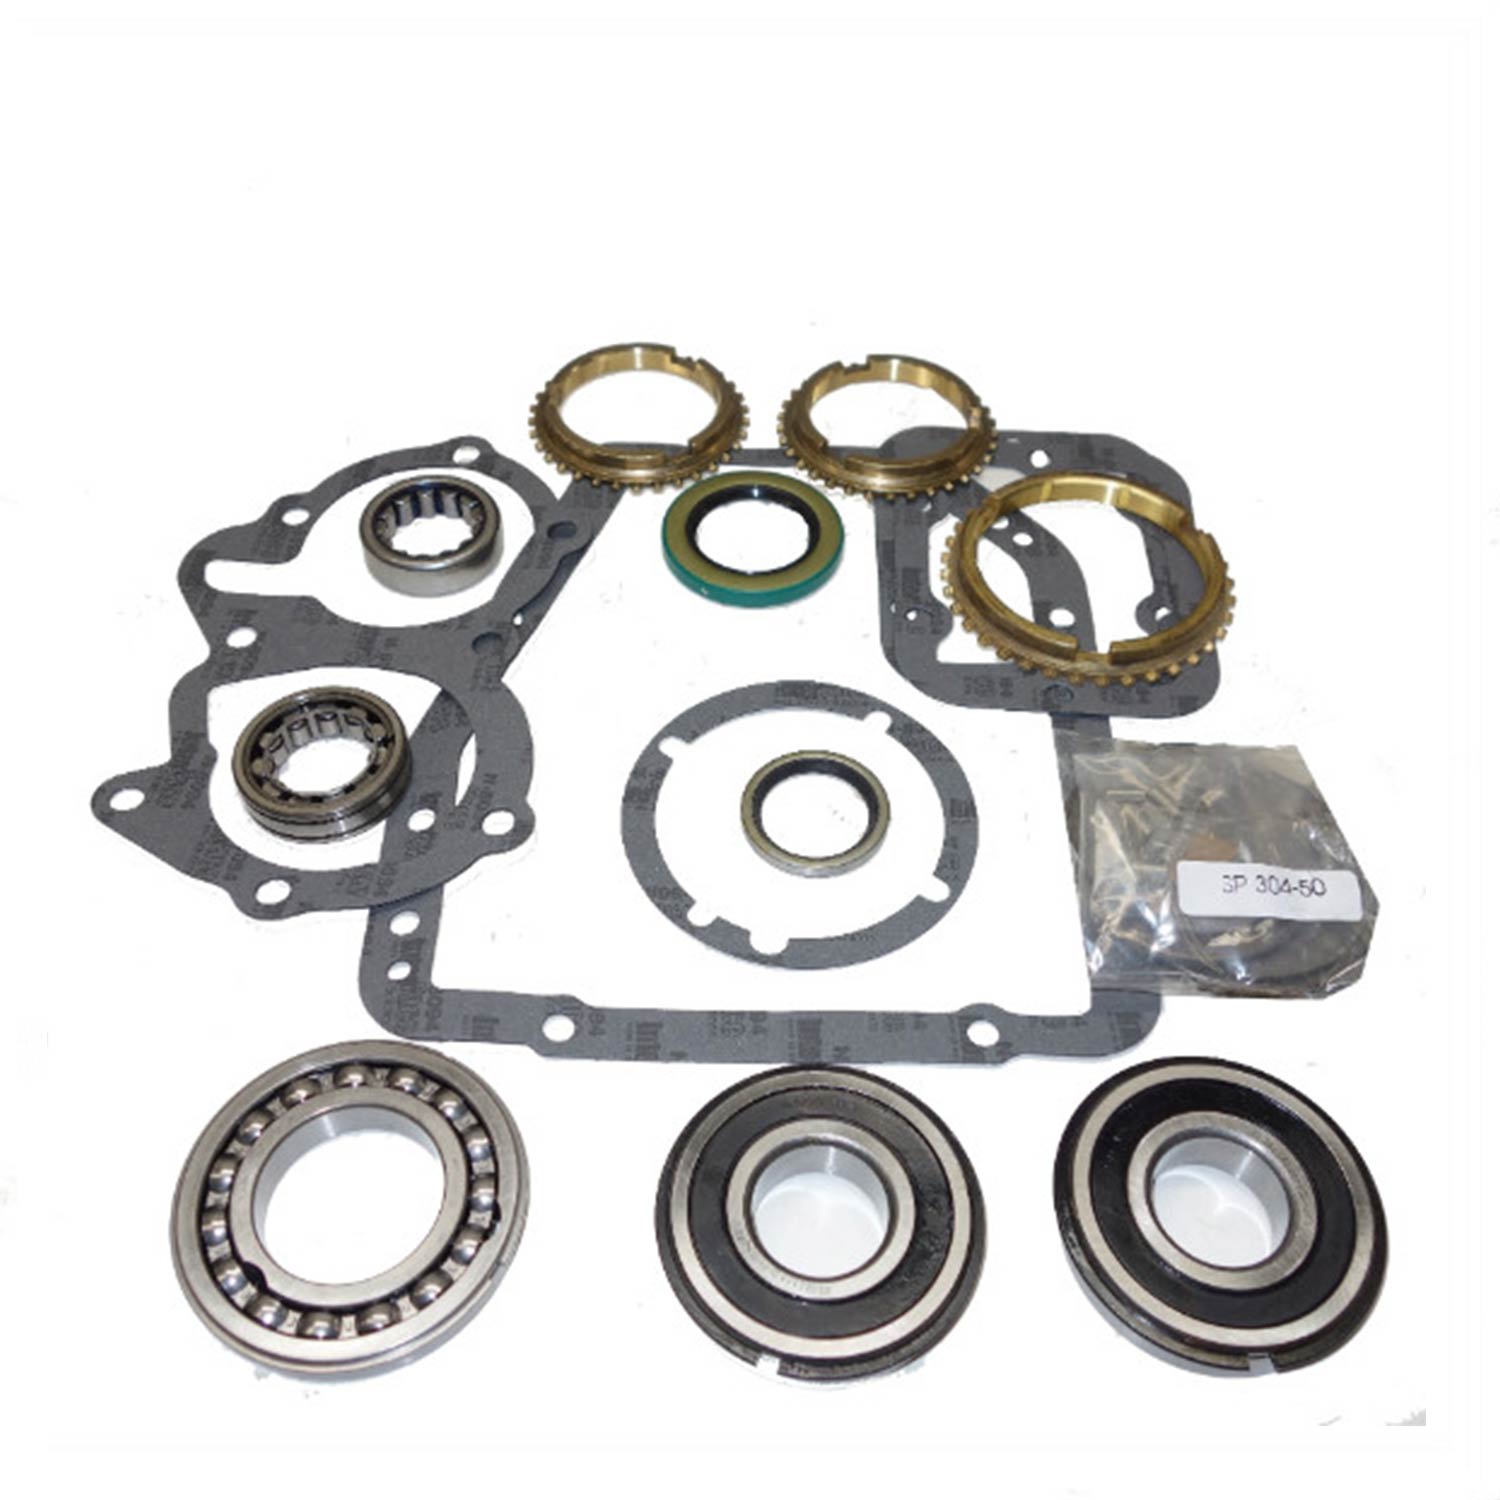 USA Standard 77233 Manual Transmission Sm465 Bearing Kit, 1988+ GM 4-Spd With Synchro'S